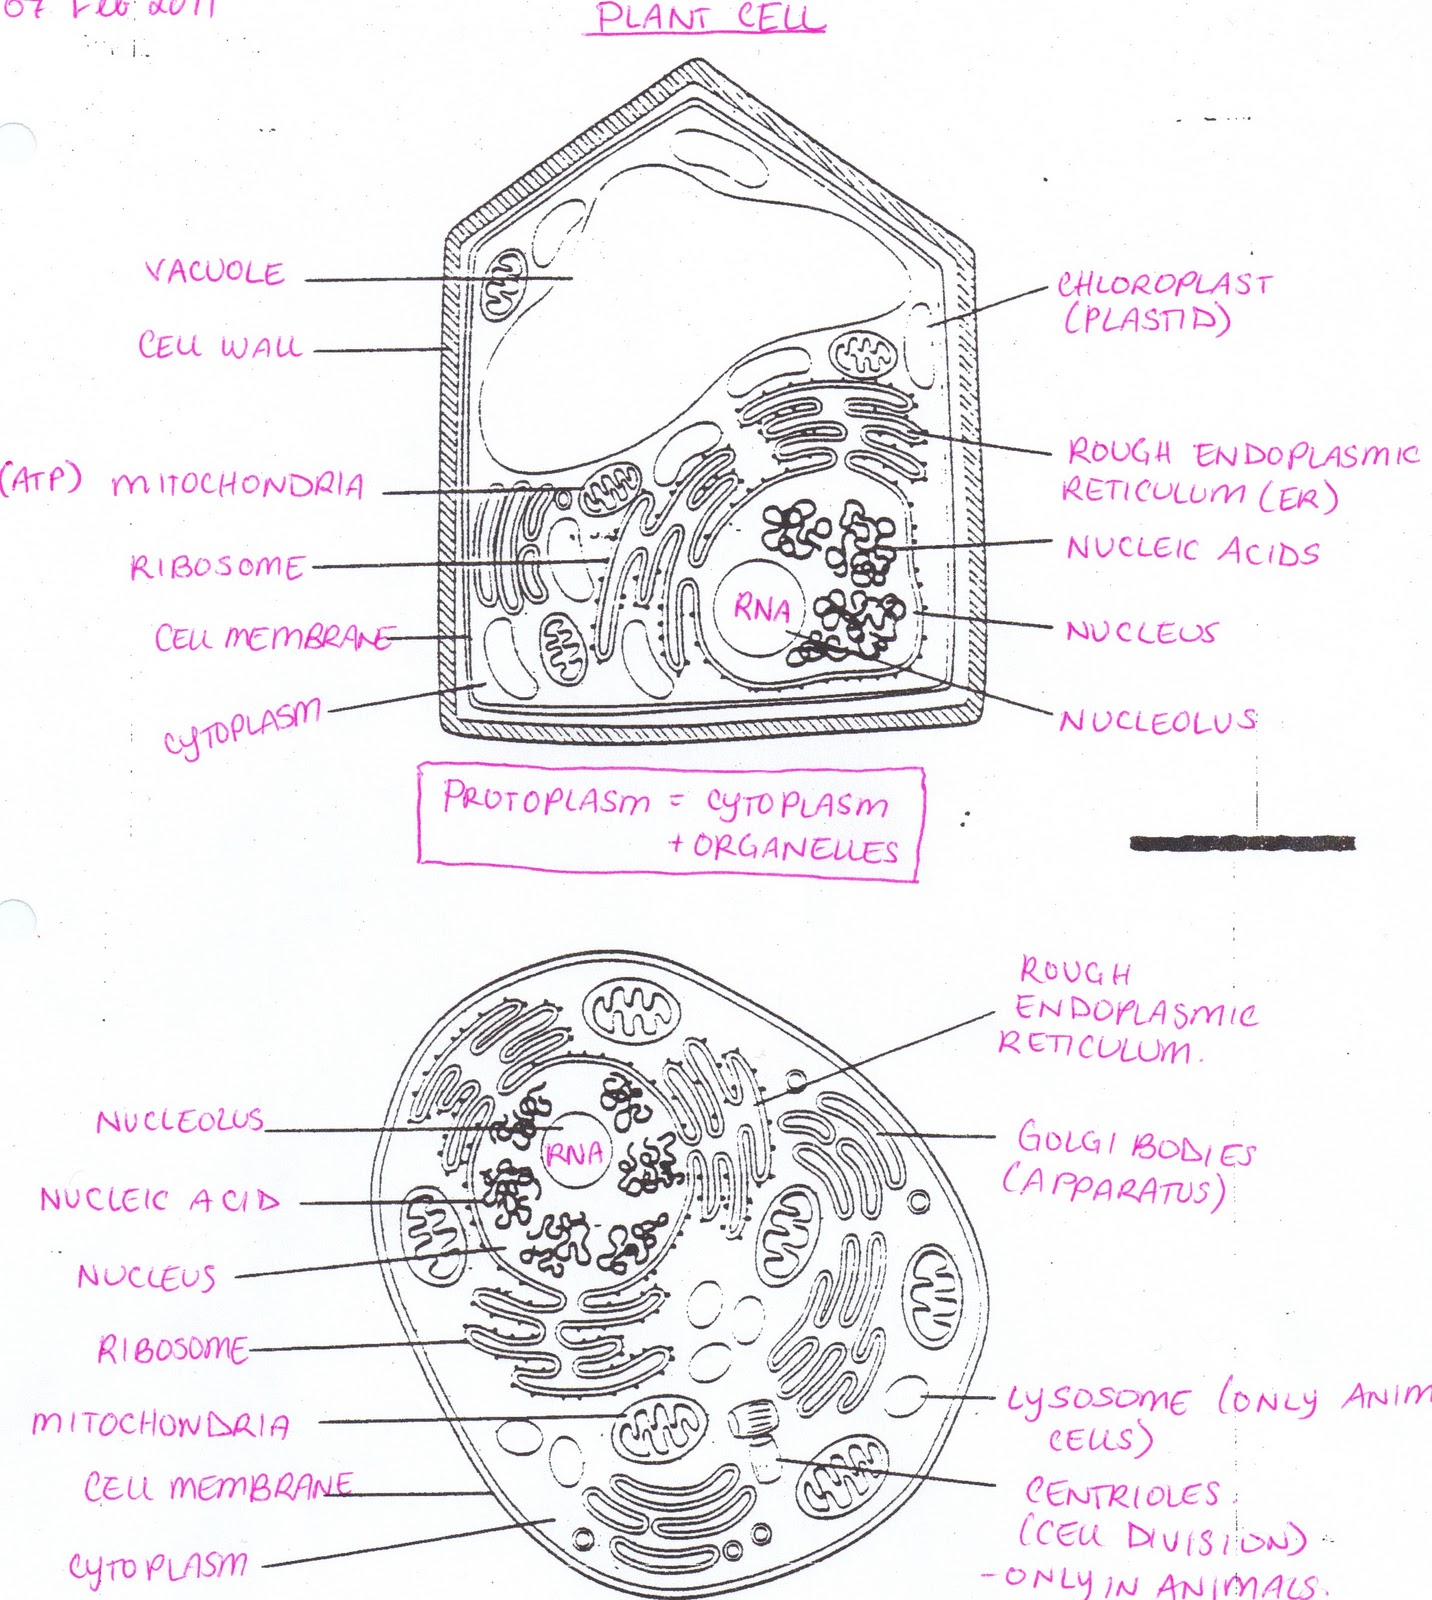 All Saints Online: Plant and Animal Cell Diagrams